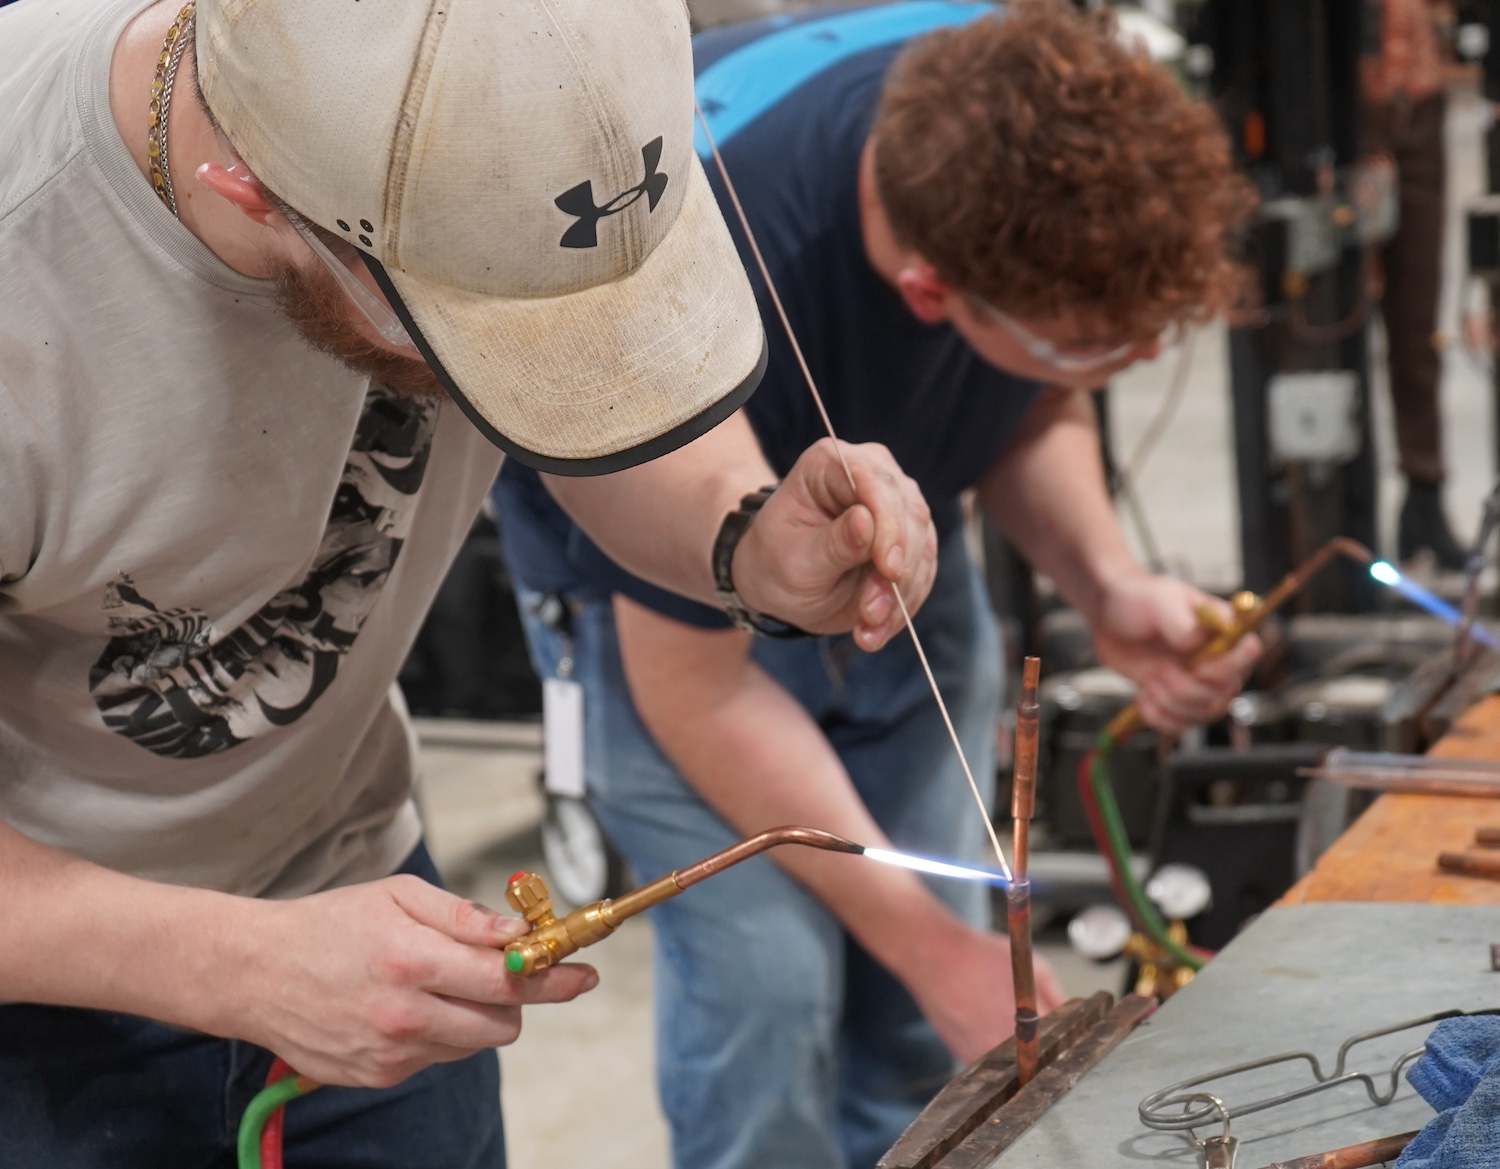 Students soldering a pipe